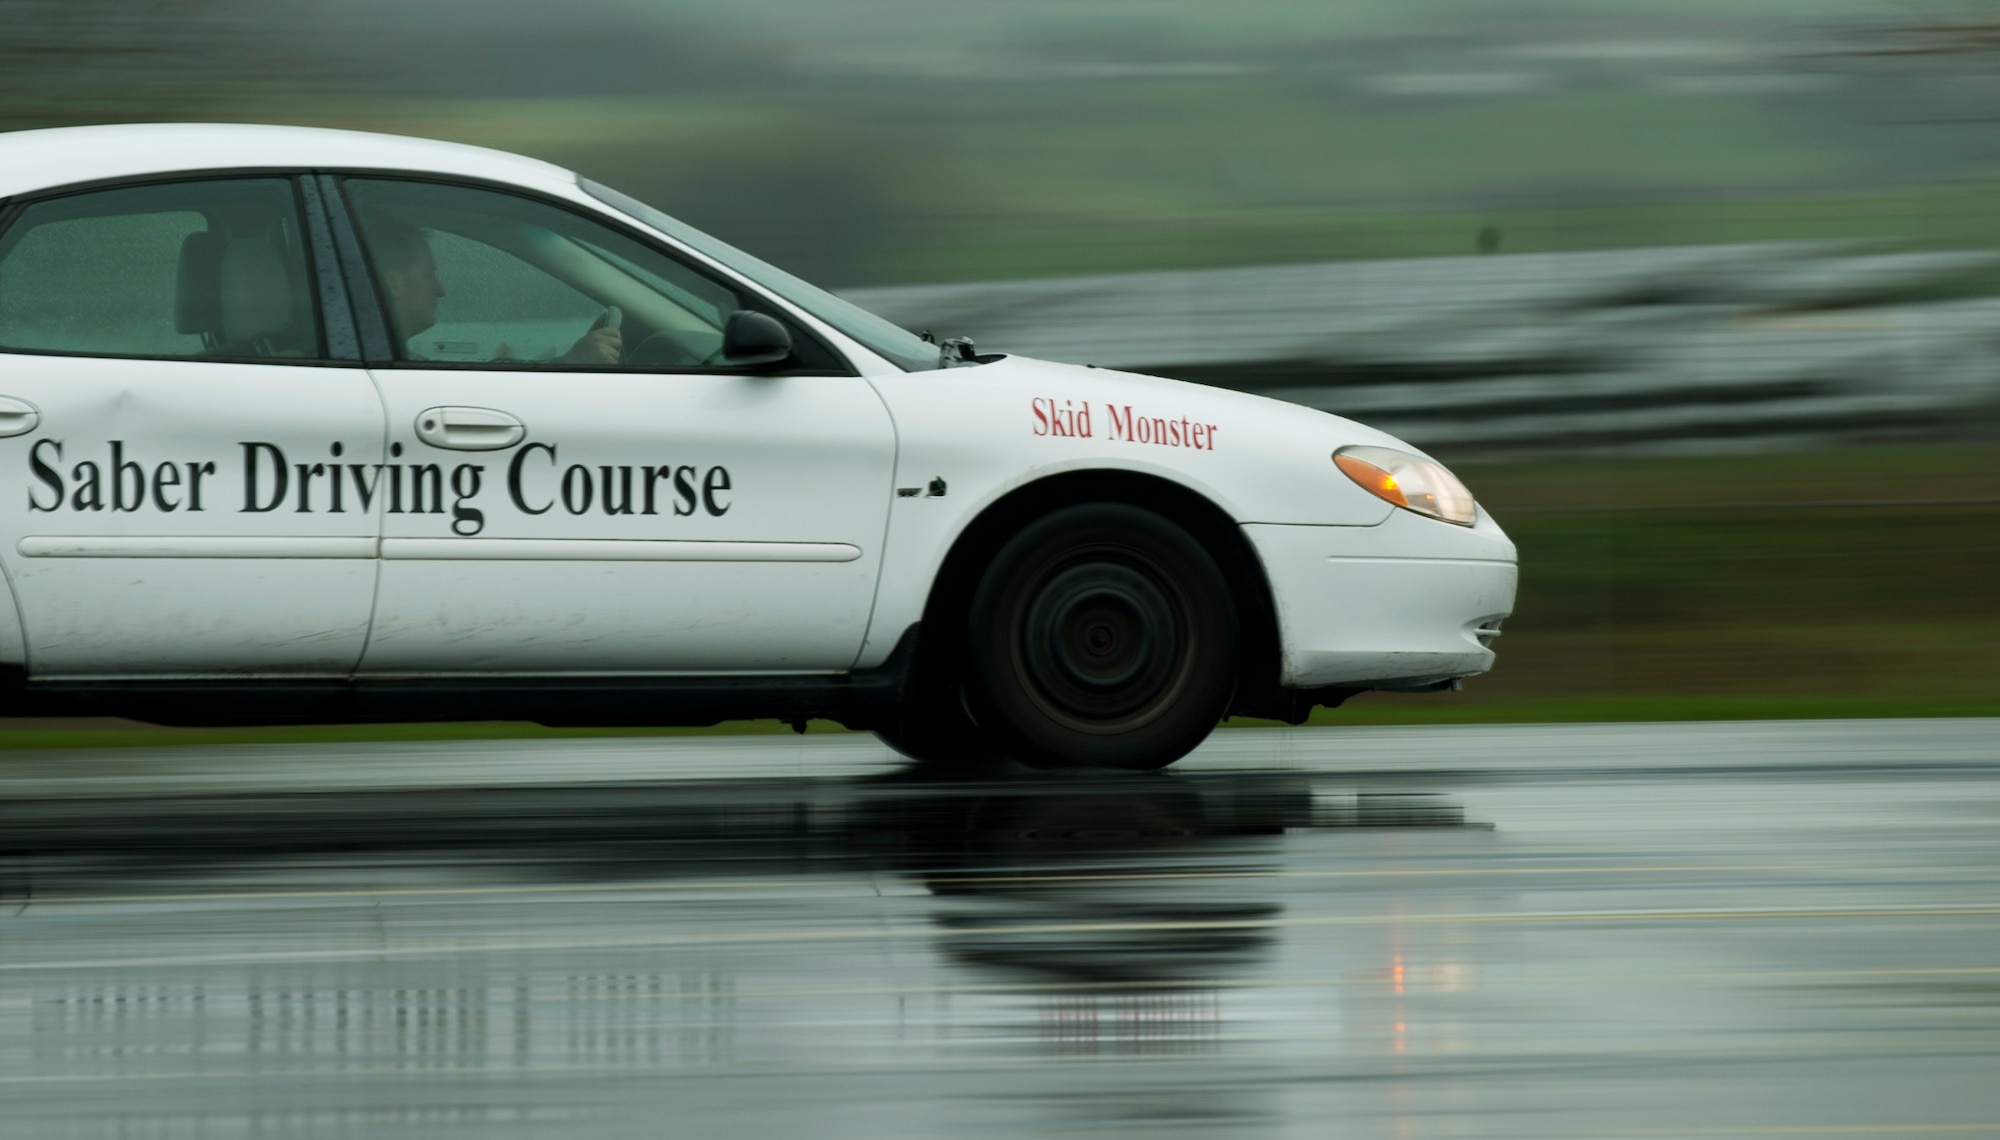 U.S. Air Force Tech. Sgt. Gregory Westmoreland, a 52nd Fighter Wing Safety occupational safety and health technician, drives a vehicle during a training session at the Saber Driving Course at Spangdahlem Air Base, Germany, Jan. 11, 2016. The driving course focuses on bringing awareness to drivers about speeding on icy road conditions. (U.S. Air Force photo by Airman 1st Class Timothy Kim/Released)